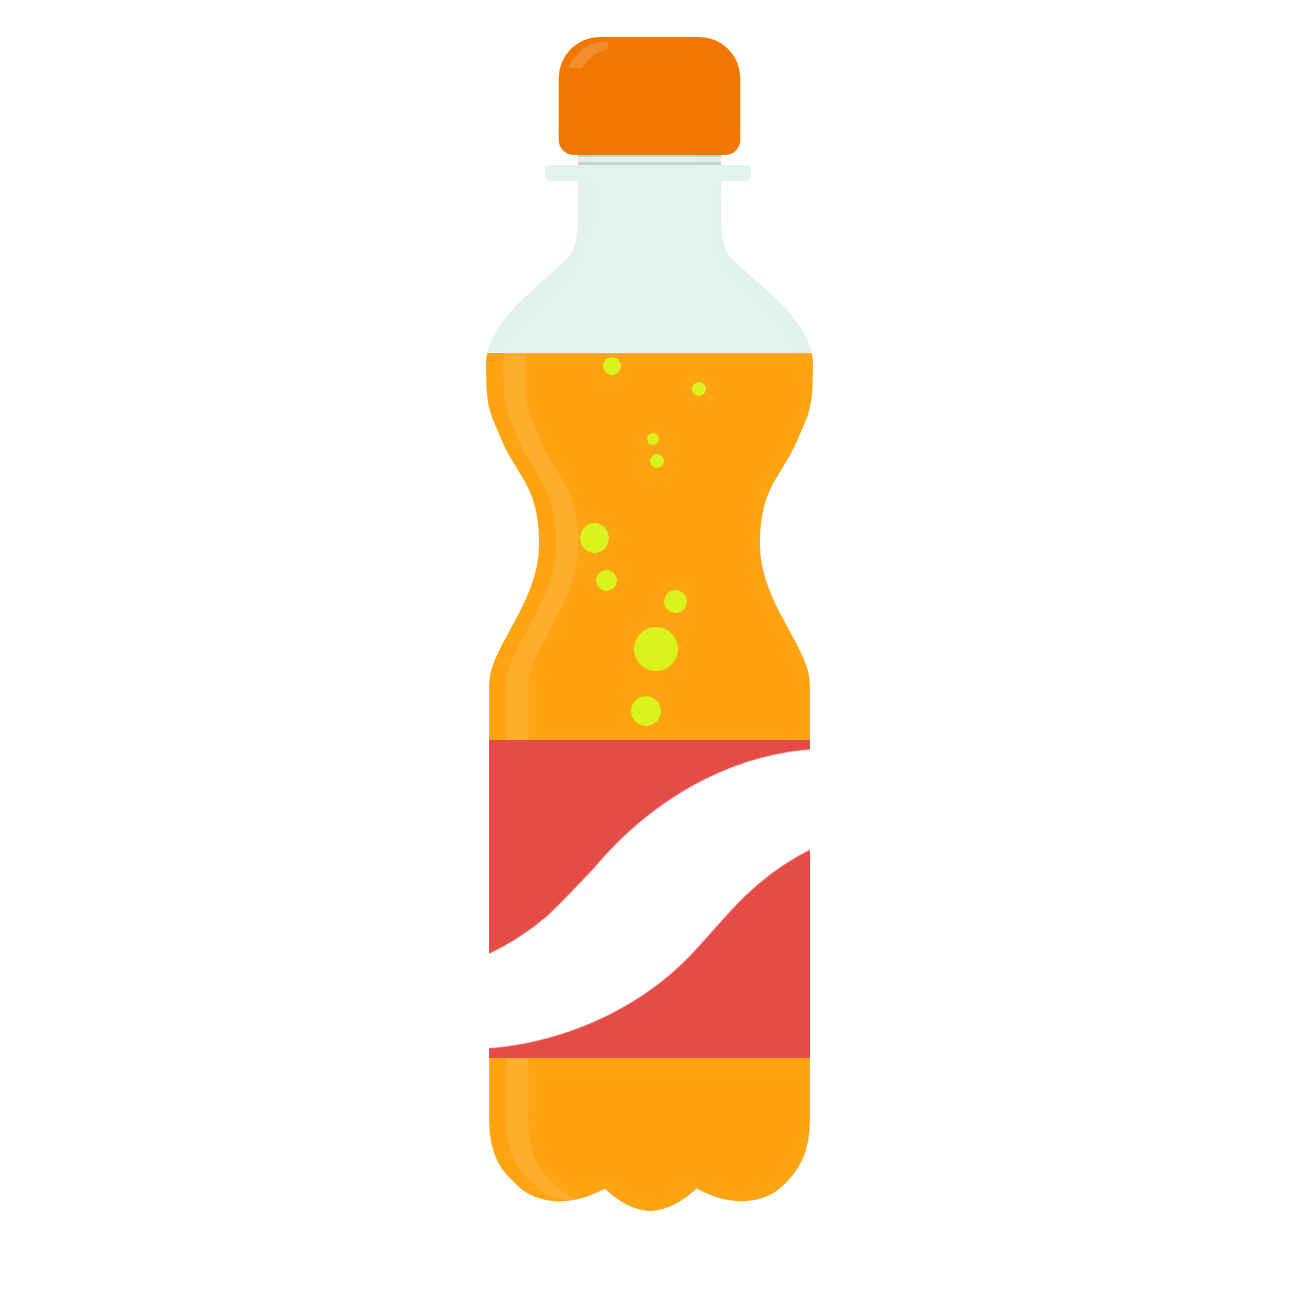 Bottle icons | OpenGameArt.org